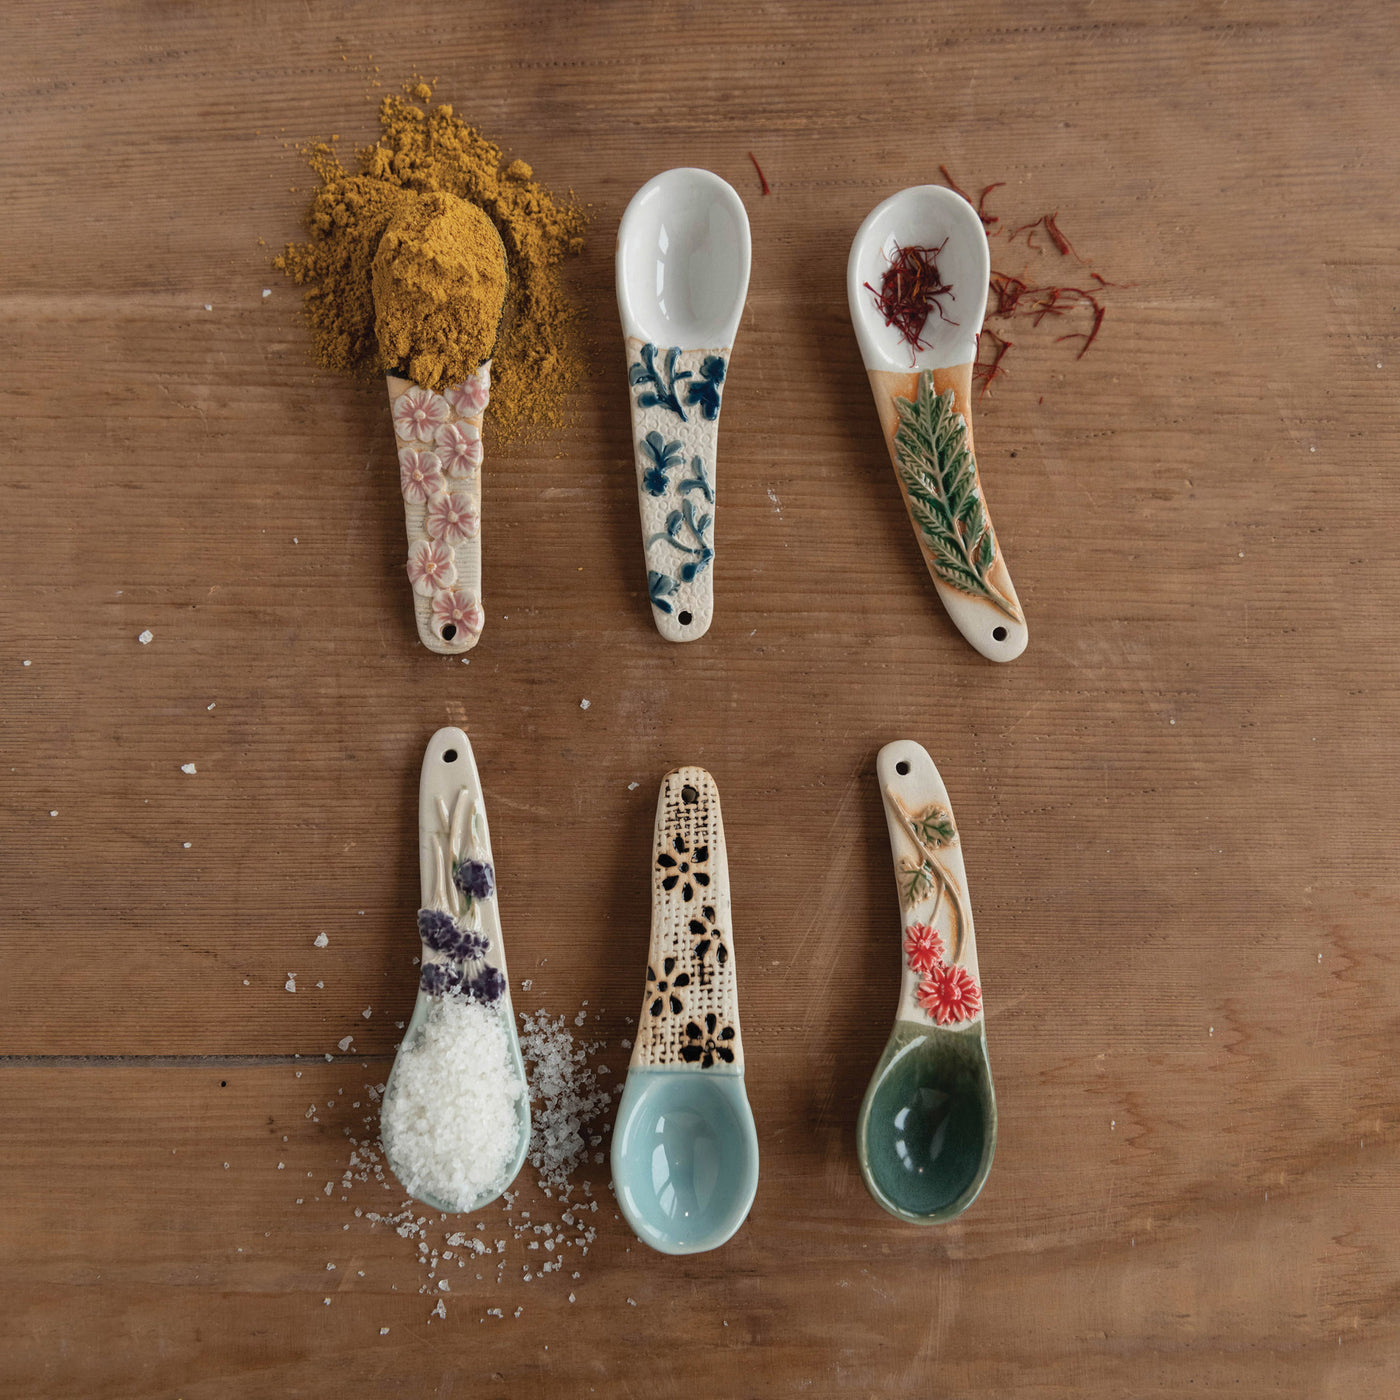 Painted Spoon with Flowers